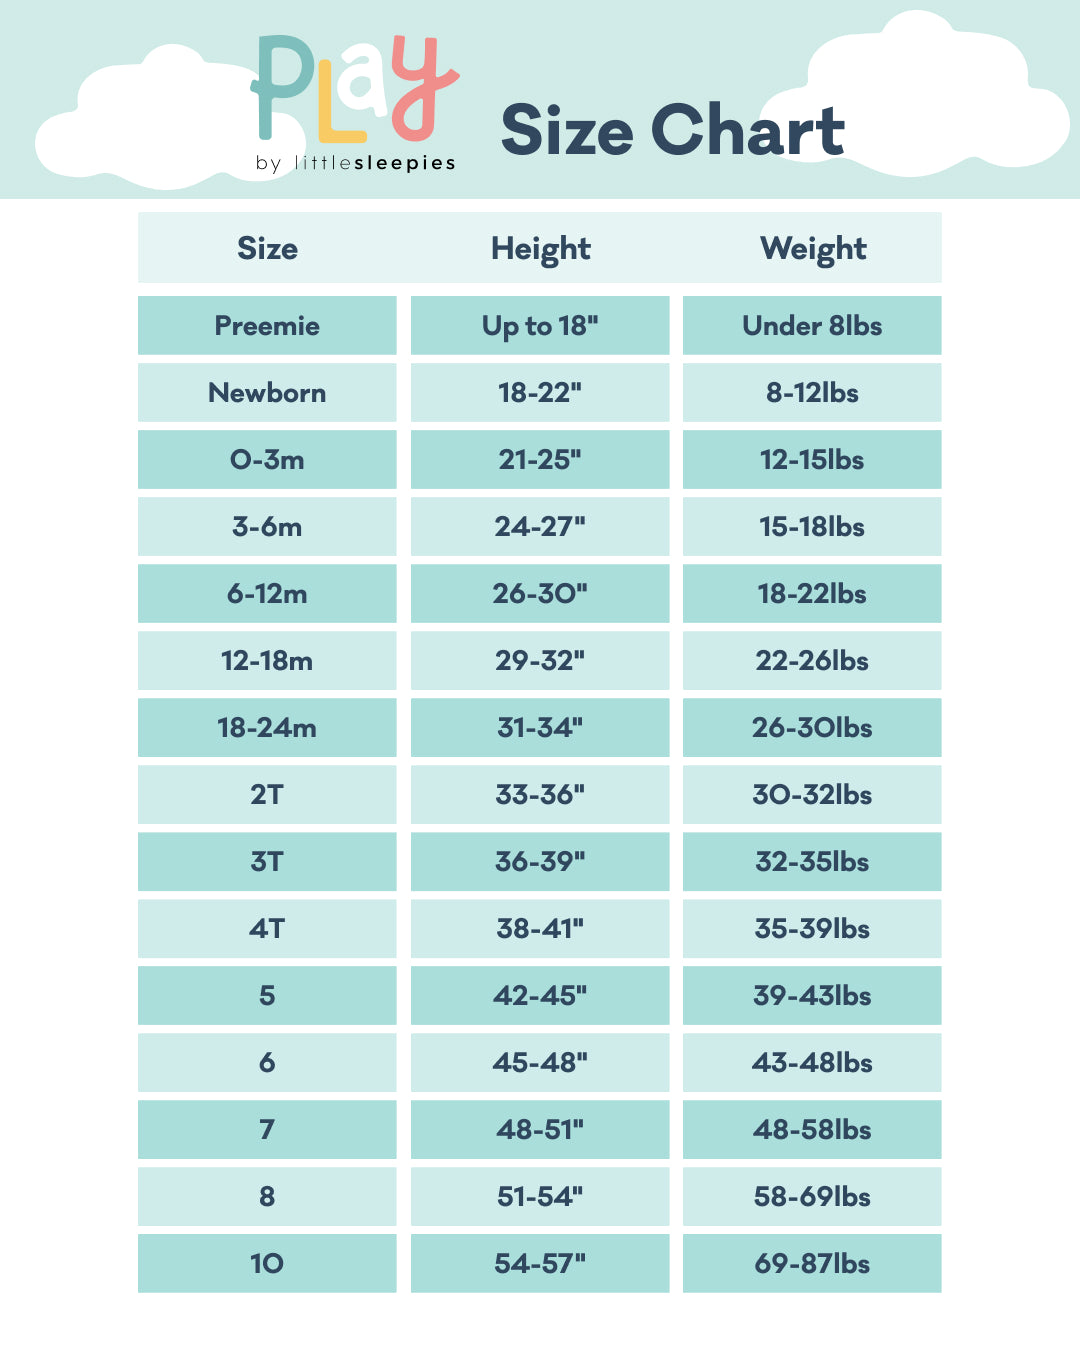 Play Size Chart: size Preemie fits under 8lbs and up to 18in; size Newborn fits 8-12lbs and 18-22in; size 0-3M fits 12-15lbs and 21-25in; size 3-6M fits 15-18lbs and 24-27in; 6-12M fits 18-22lbs and 26-30in; size 12-18M fits 22-26lbs and 29-32in; size 18-24M fits 26-30lbs and 31-34in; size 2T fits 30-35lbs and 33-36in; size 3T fits 32-35lbs and 36-39in; size 4T fits 35-39lbs and 38-41in; size 5 fits 39-43lbs and 42-45in; size 6 fits 43-48lbs and 45-48in; size 7 fits 48-58lbs and 48-51in; size 8 fits 58-69lbs and 51-54in; size 10 fits 69-87lbs and 54-57in